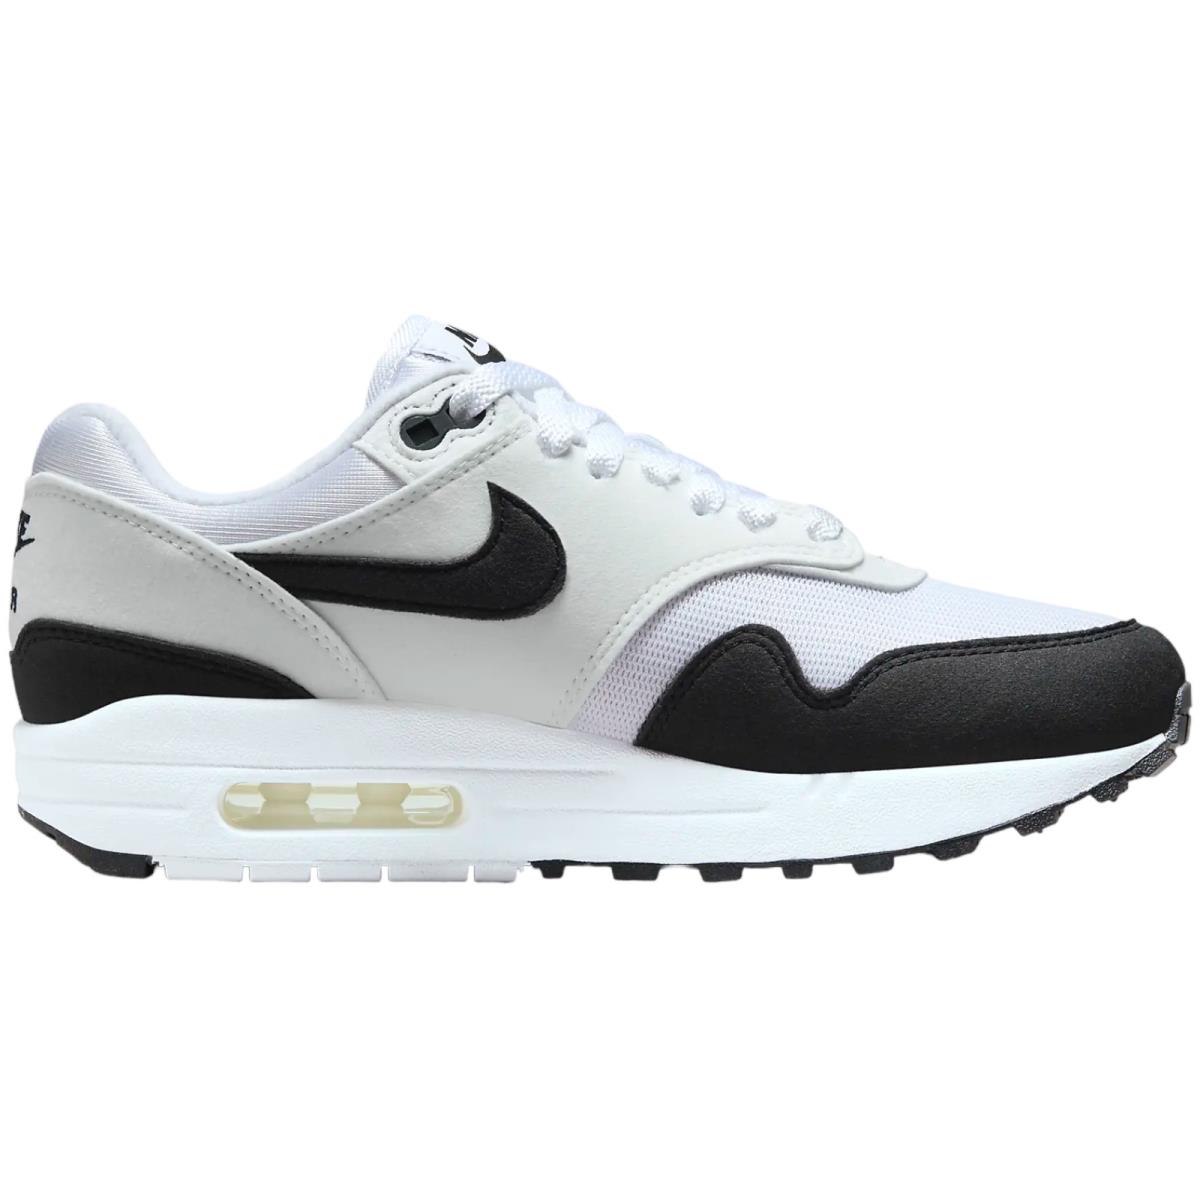 Nike Air Max 1 Women`s Casual Shoes All Colors US Sizes 6-11 White/Summit White/Black